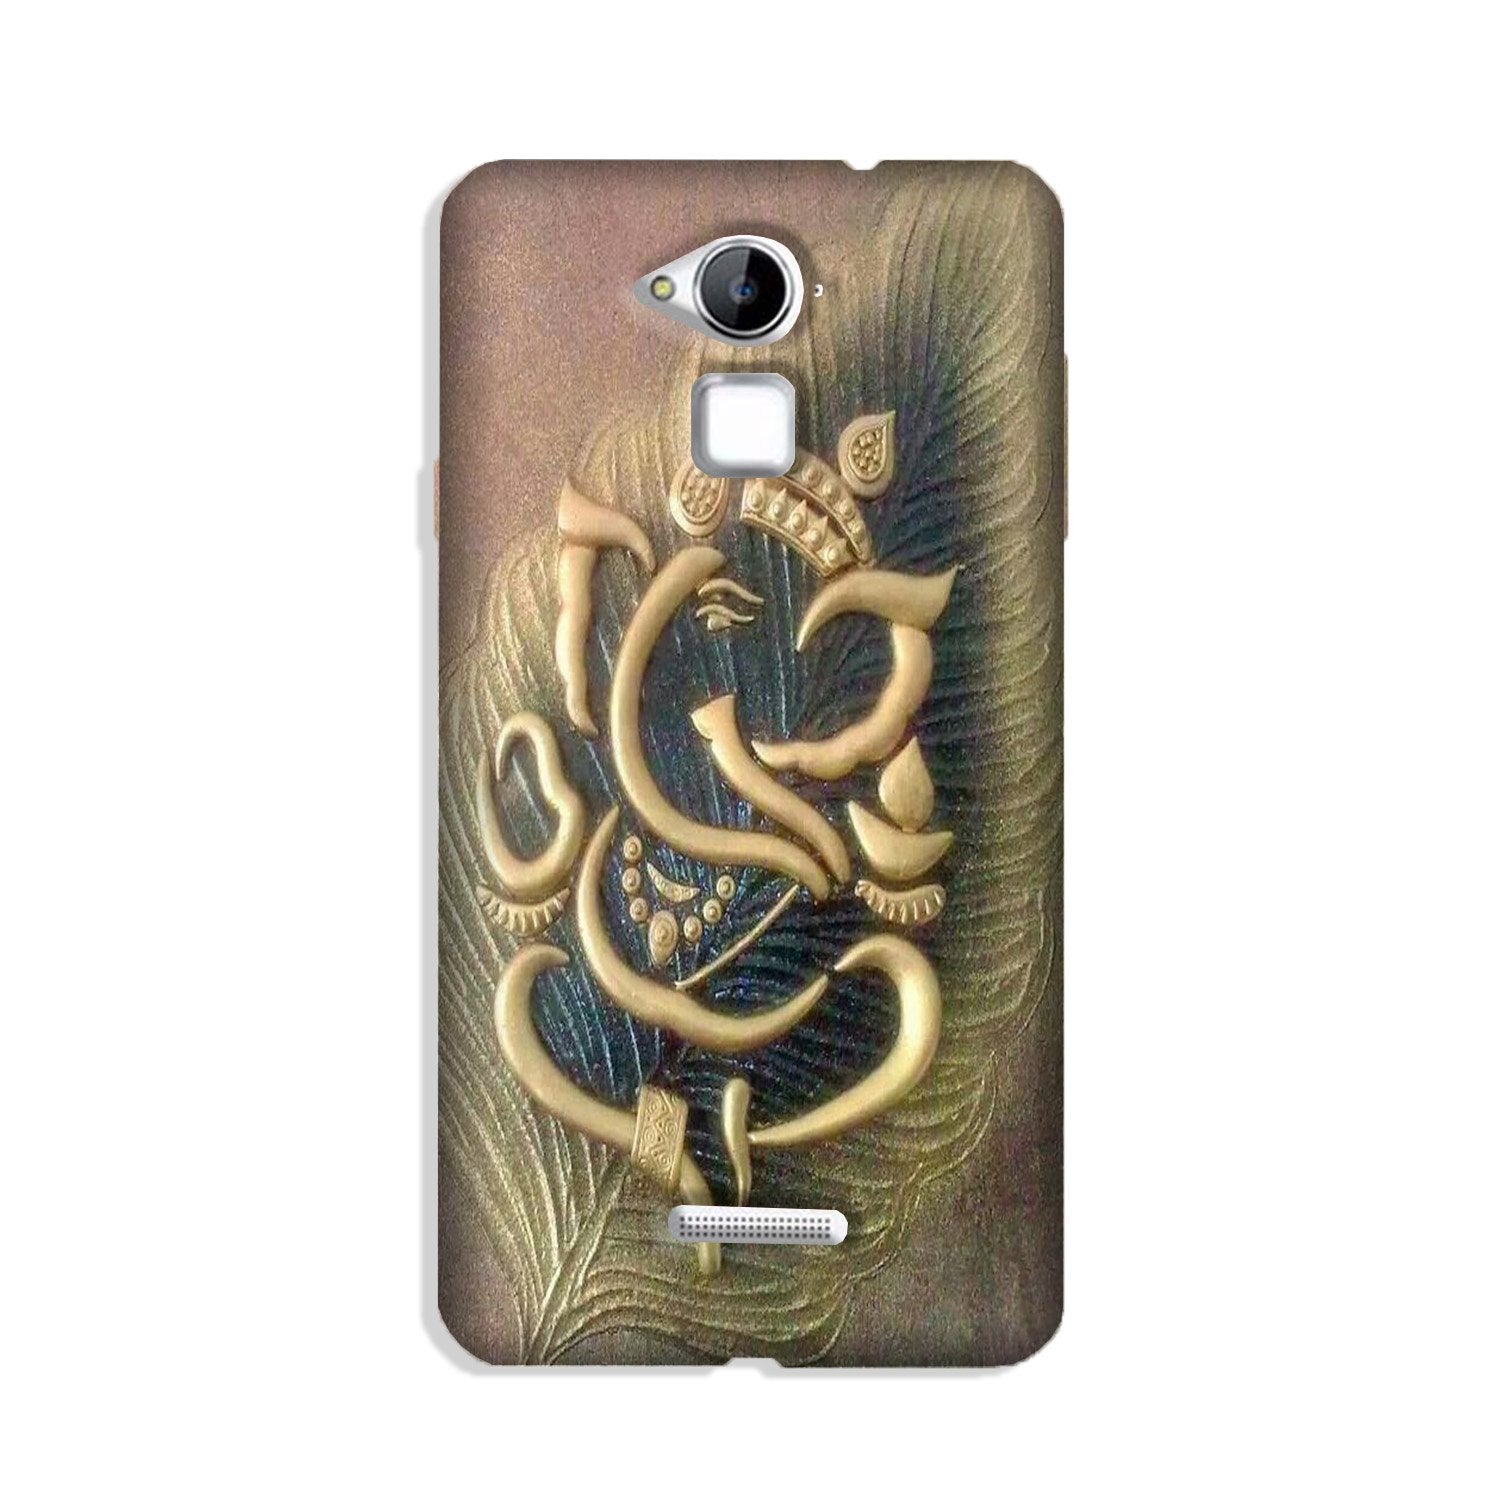 Lord Ganesha Case for Coolpad Note 3